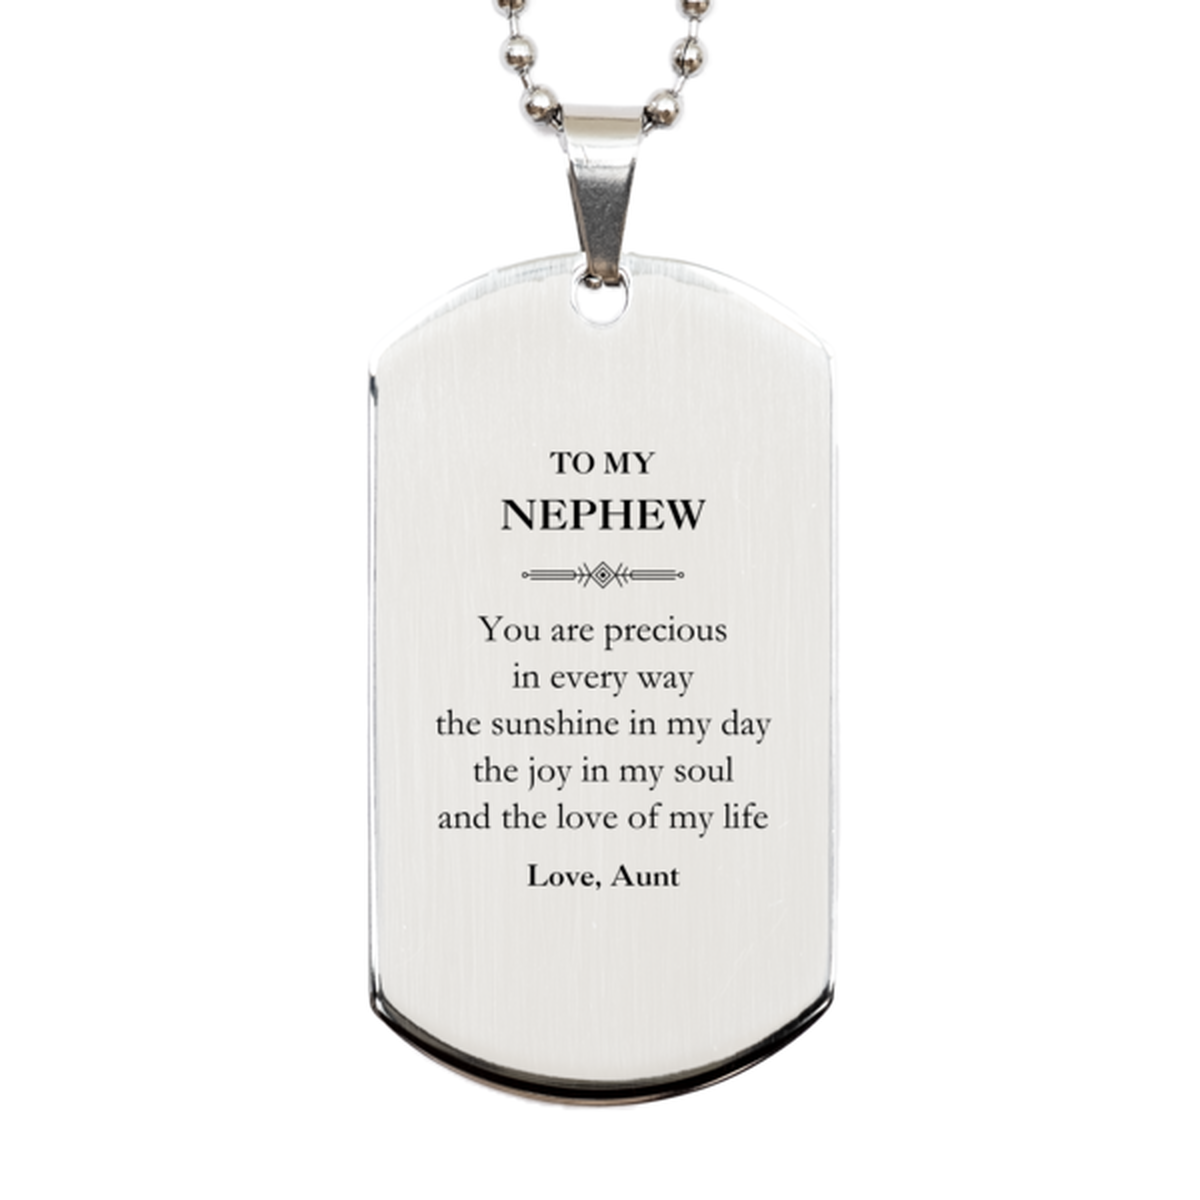 Graduation Gifts for Nephew Silver Dog Tag Present from Aunt, Christmas Nephew Birthday Gifts Nephew You are precious in every way the sunshine in my day. Love, Aunt